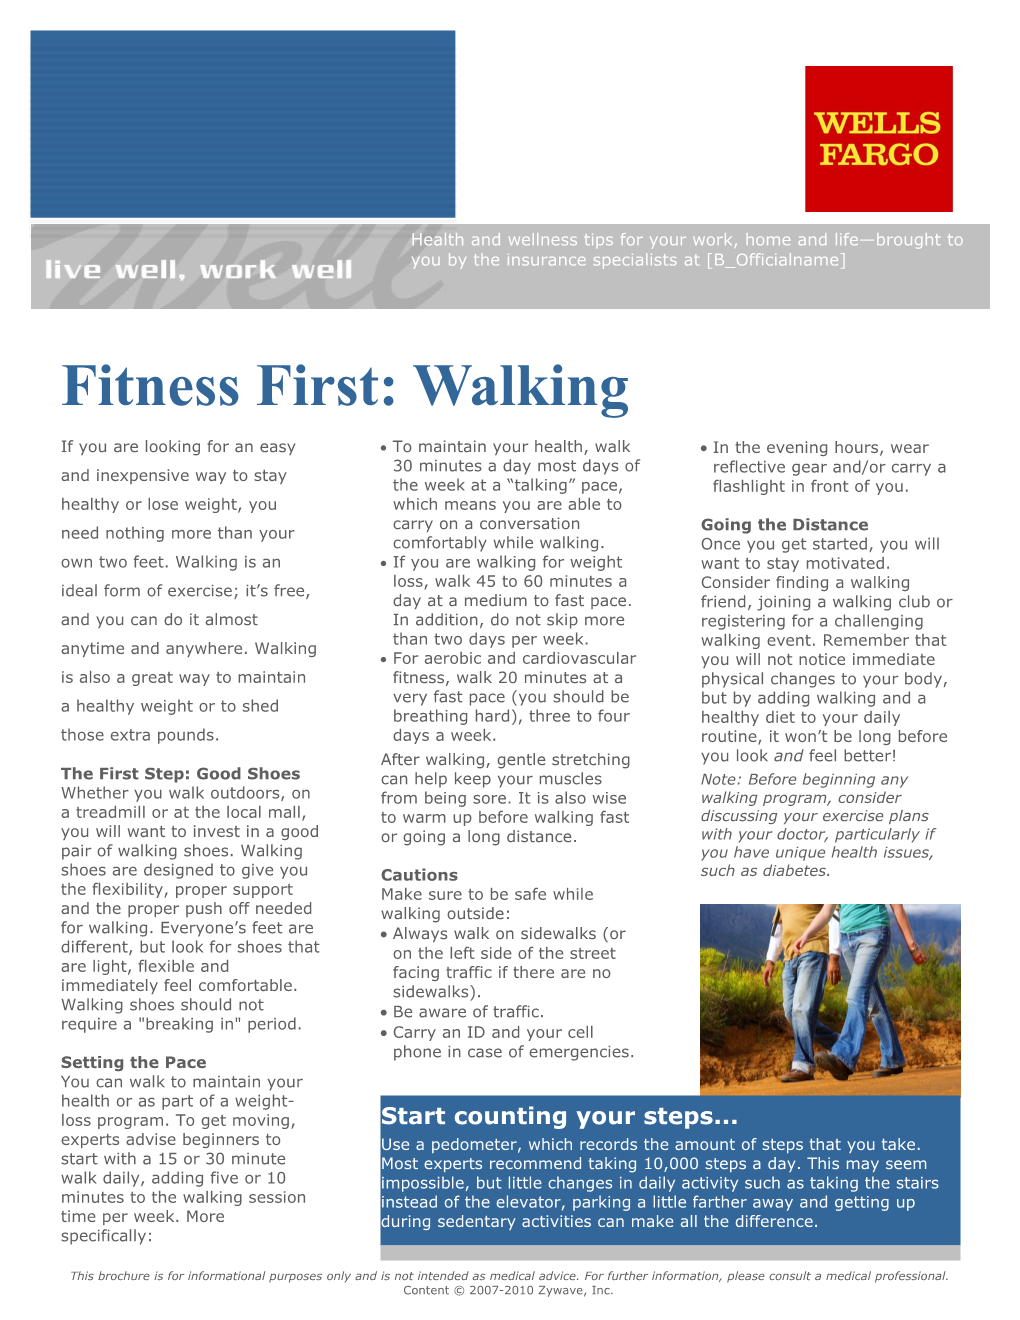 Fitness First: Walk Your Way to Good Health